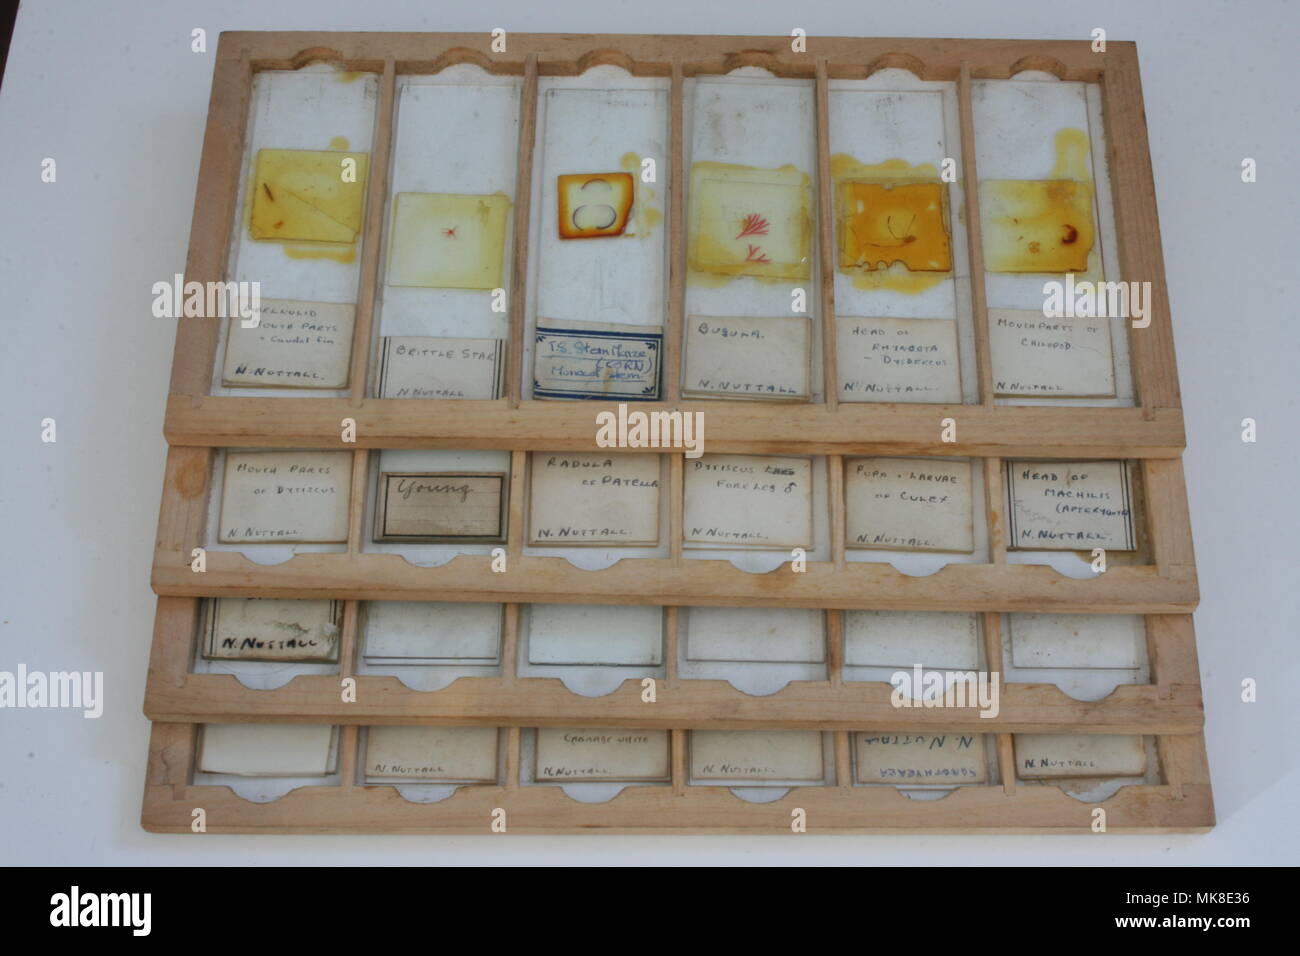 Microscope Slides in wooden tray Stock Photo